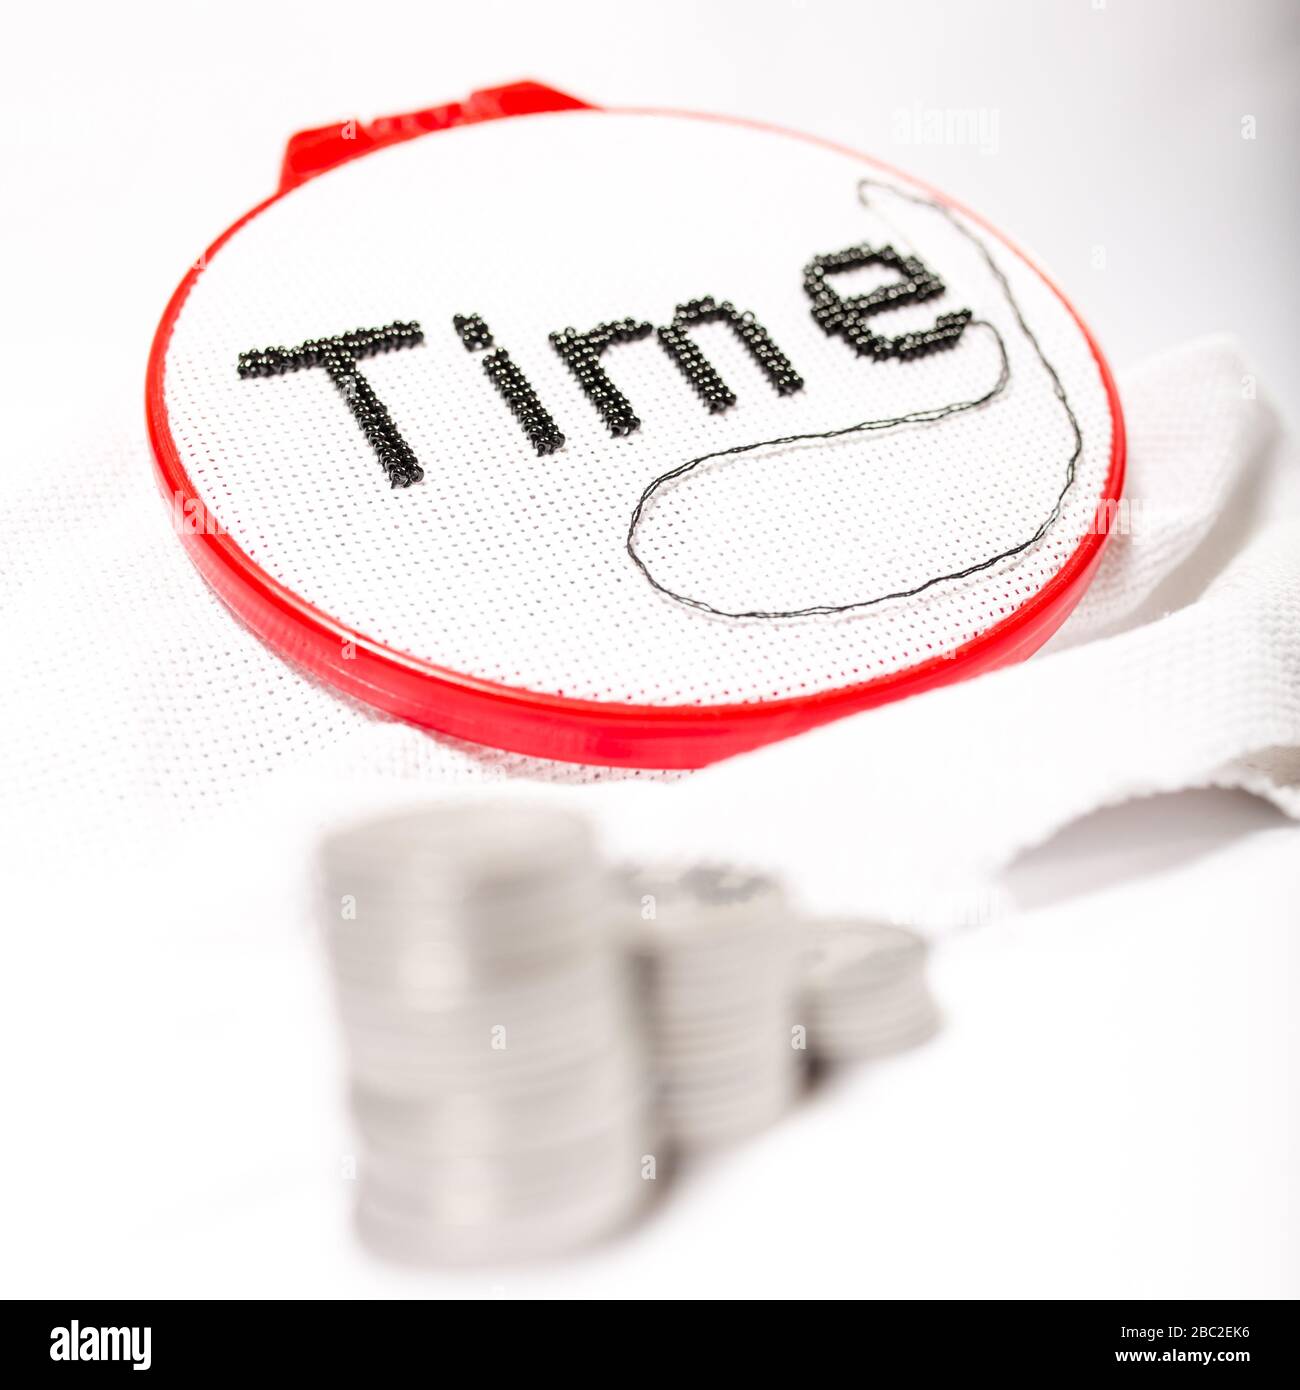 The word time is embroidered in black beads on a white background with a stack of coins on a white background. Stock Photo